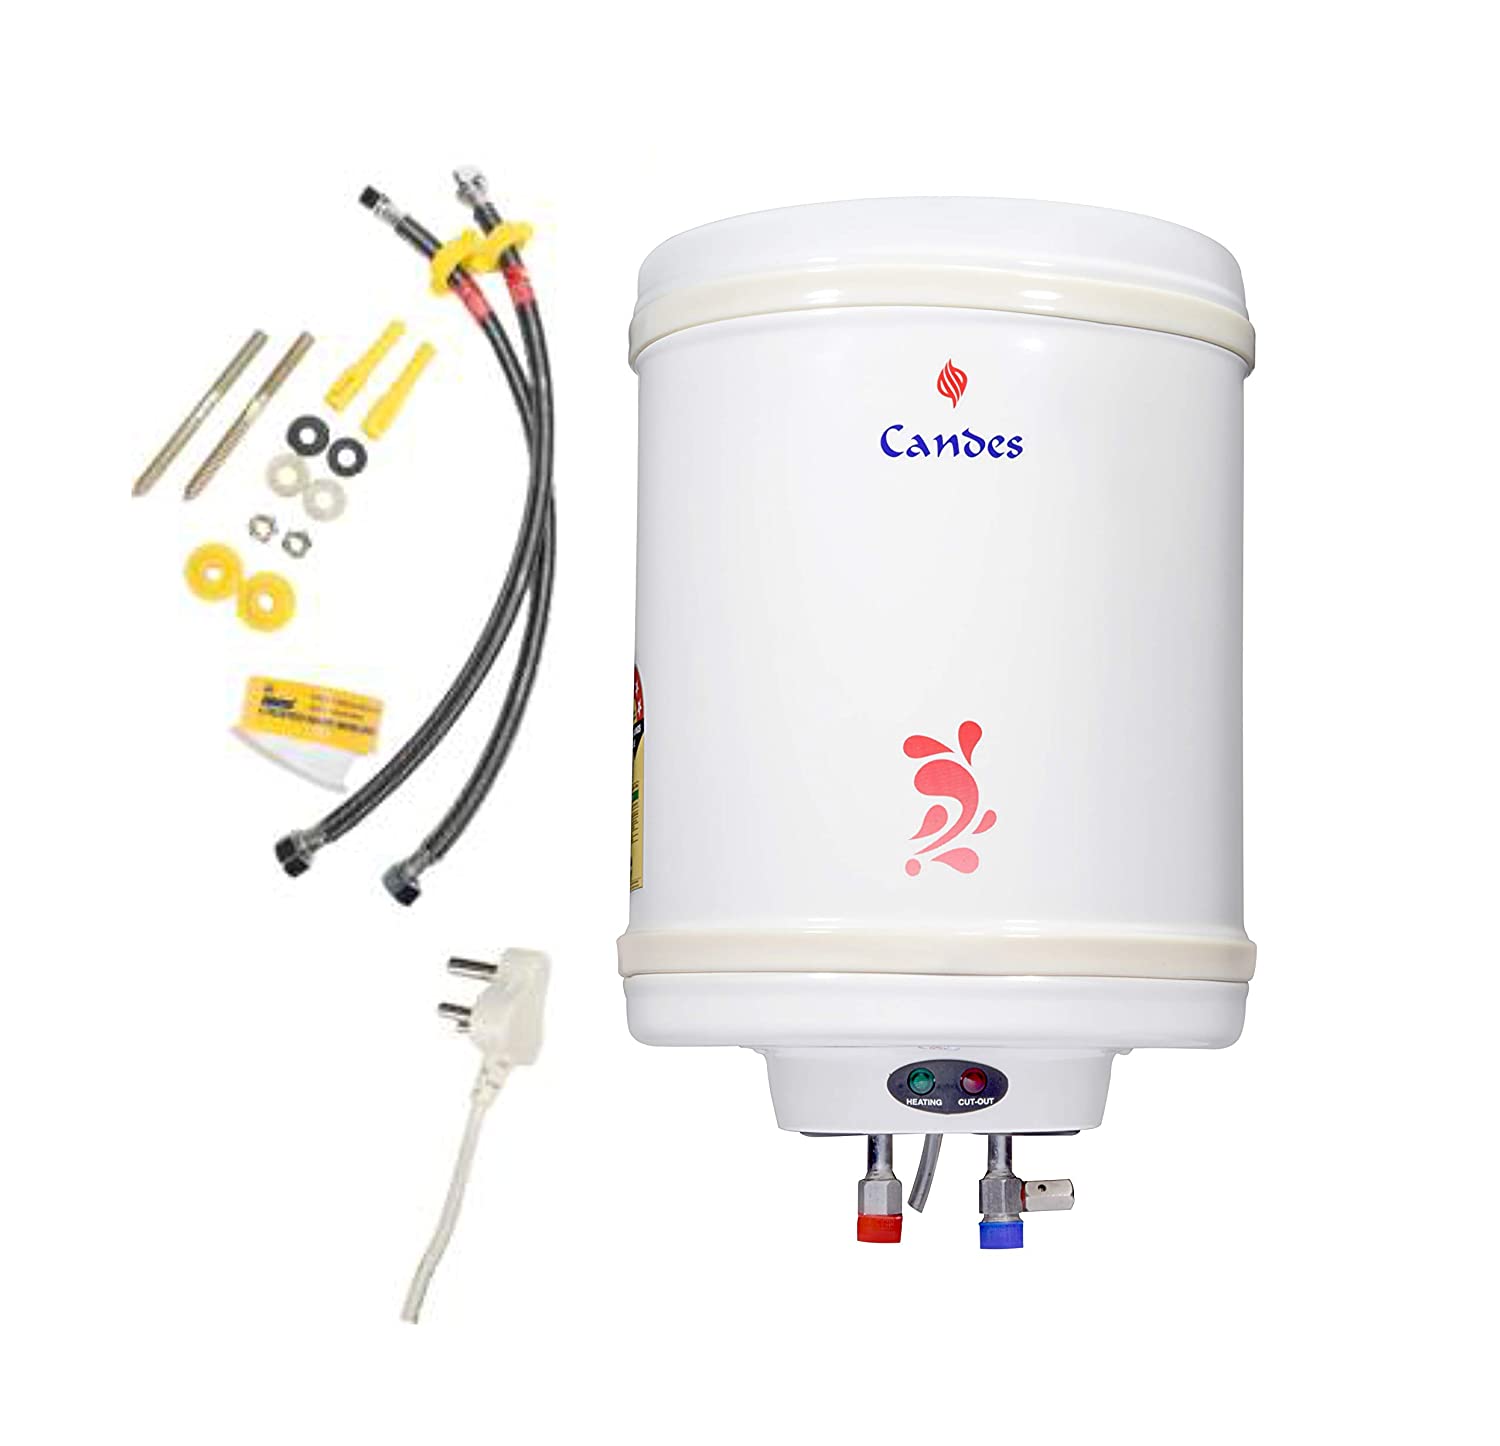 Candes 5 Star Rated 15 Litre Automatic Storage Electric Water Heater